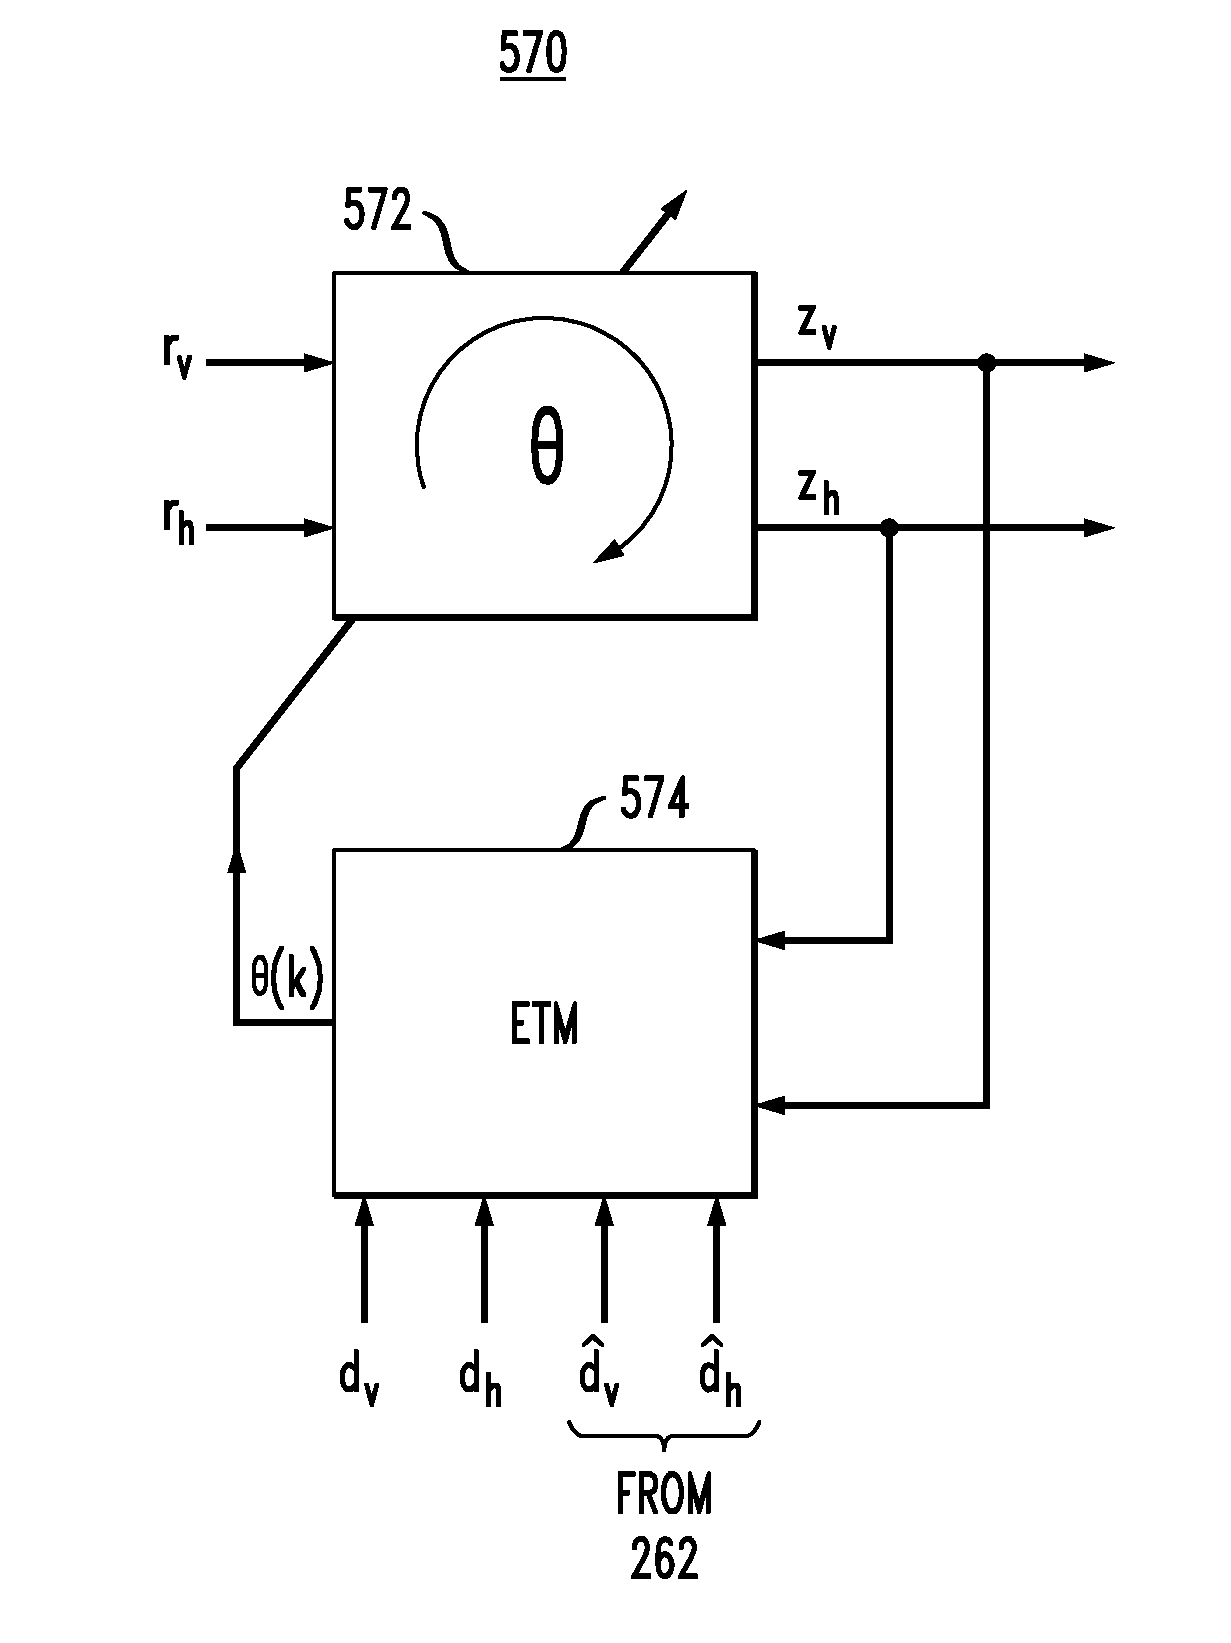 Polarization tracking and signal equalization for optical receivers configured for on-off keying or pulse amplitude modulation signaling